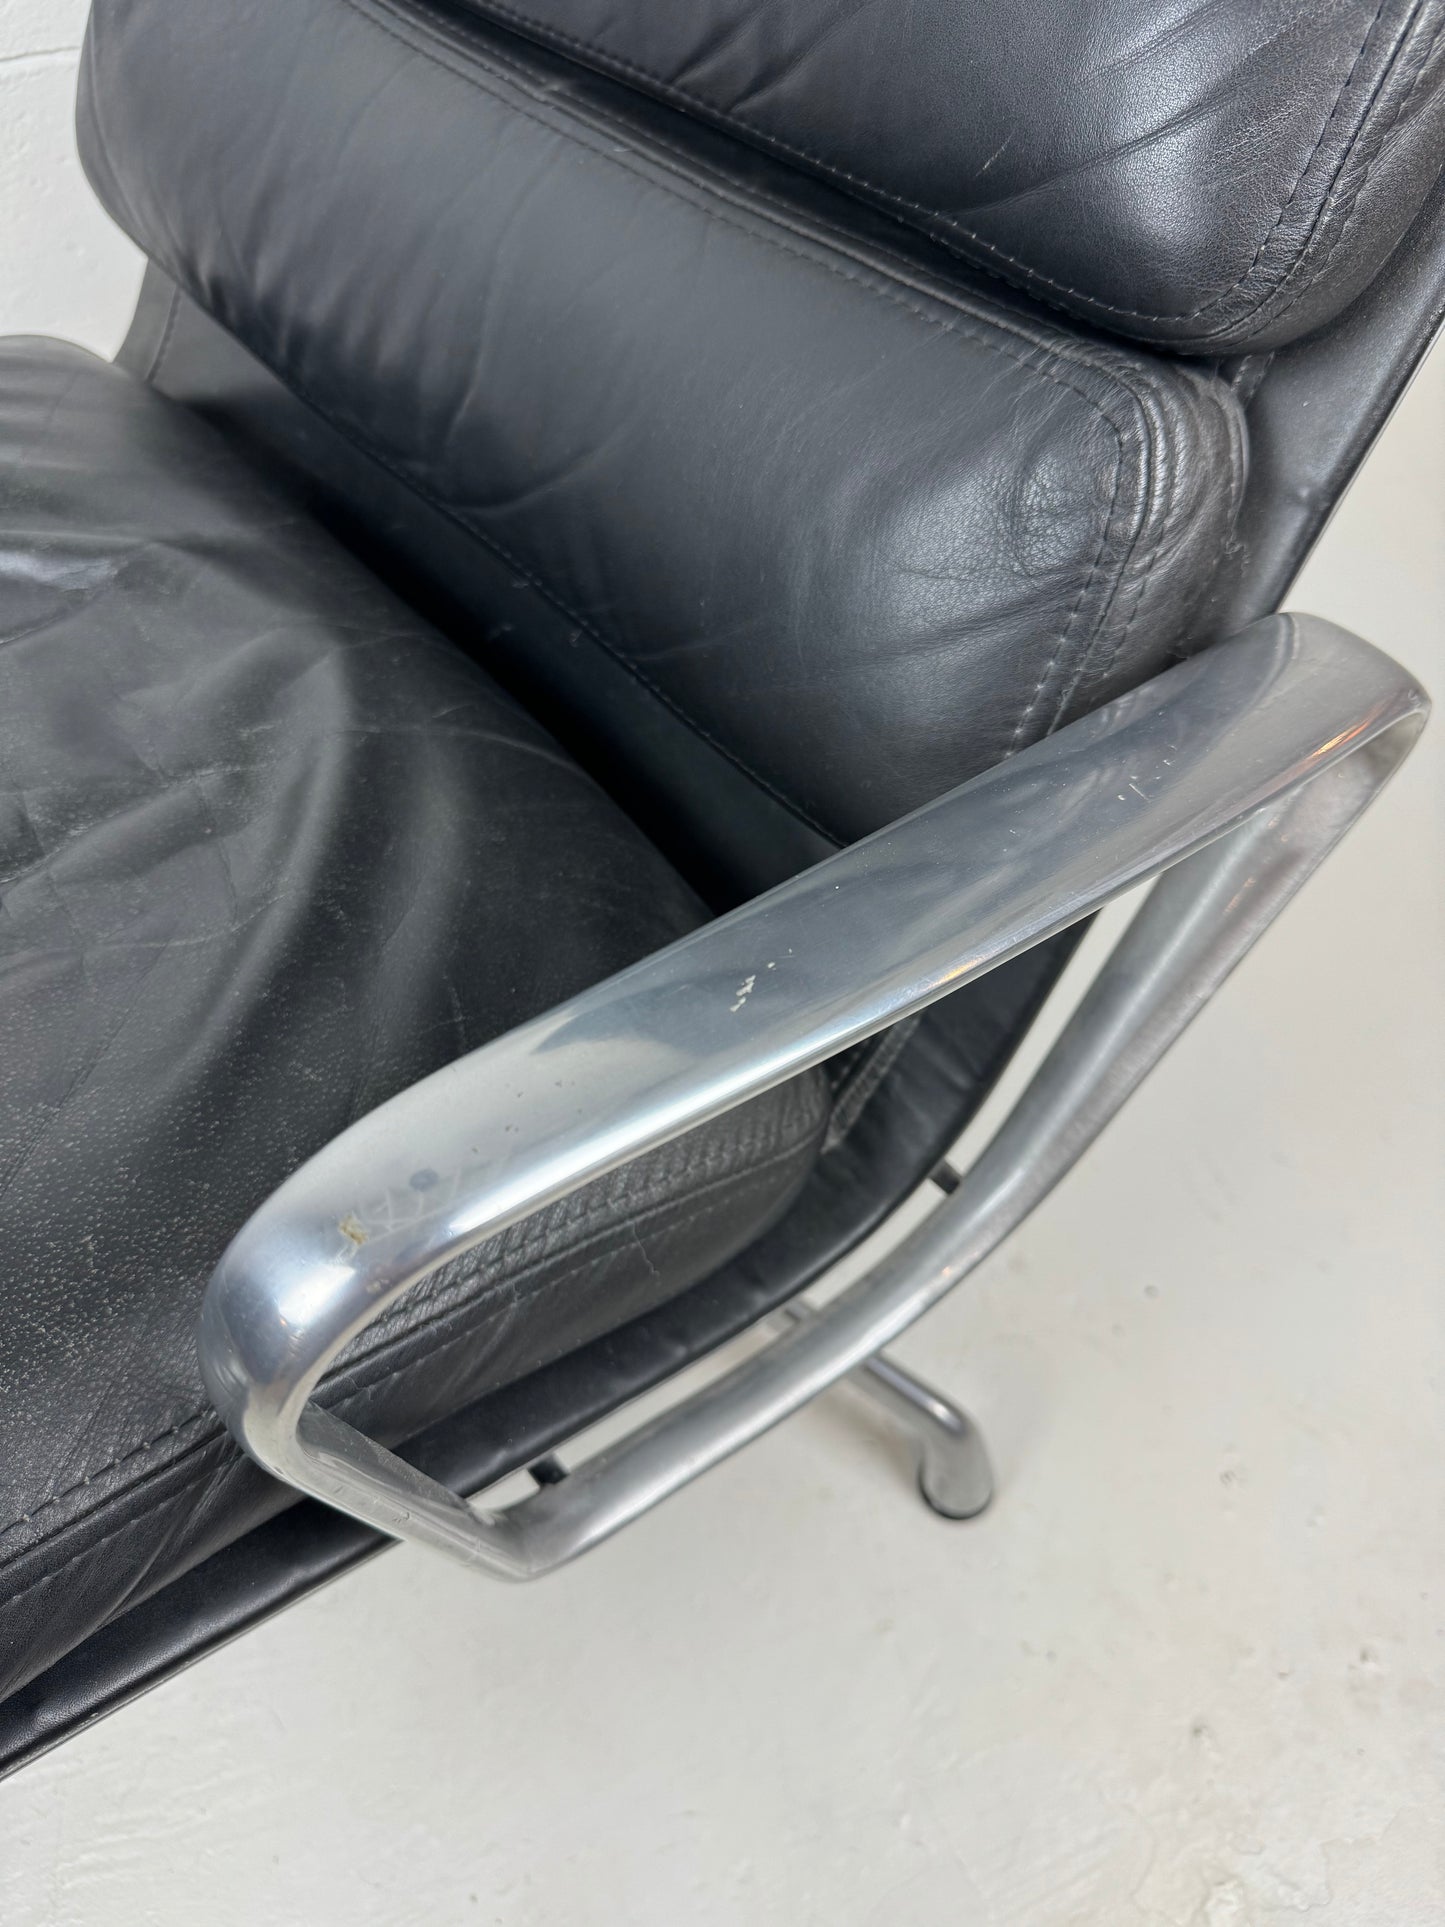 Eames High Back Leather Soft Pad Lounge Chairs